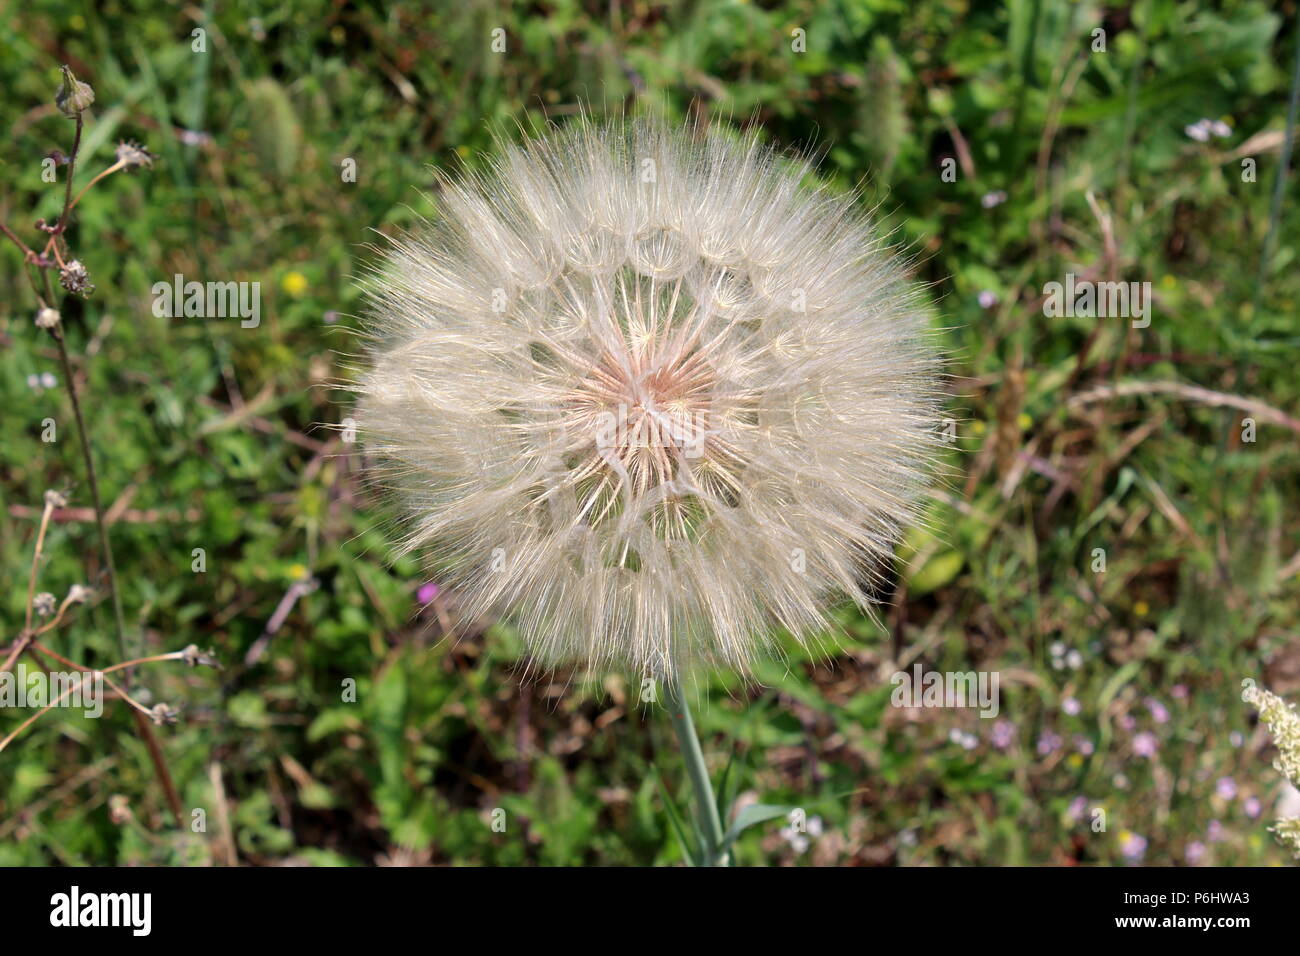 Large Dandelion or Taraxacum flower head composed of numerous small florets with green leaves and grass background on a warm sunny day Stock Photo